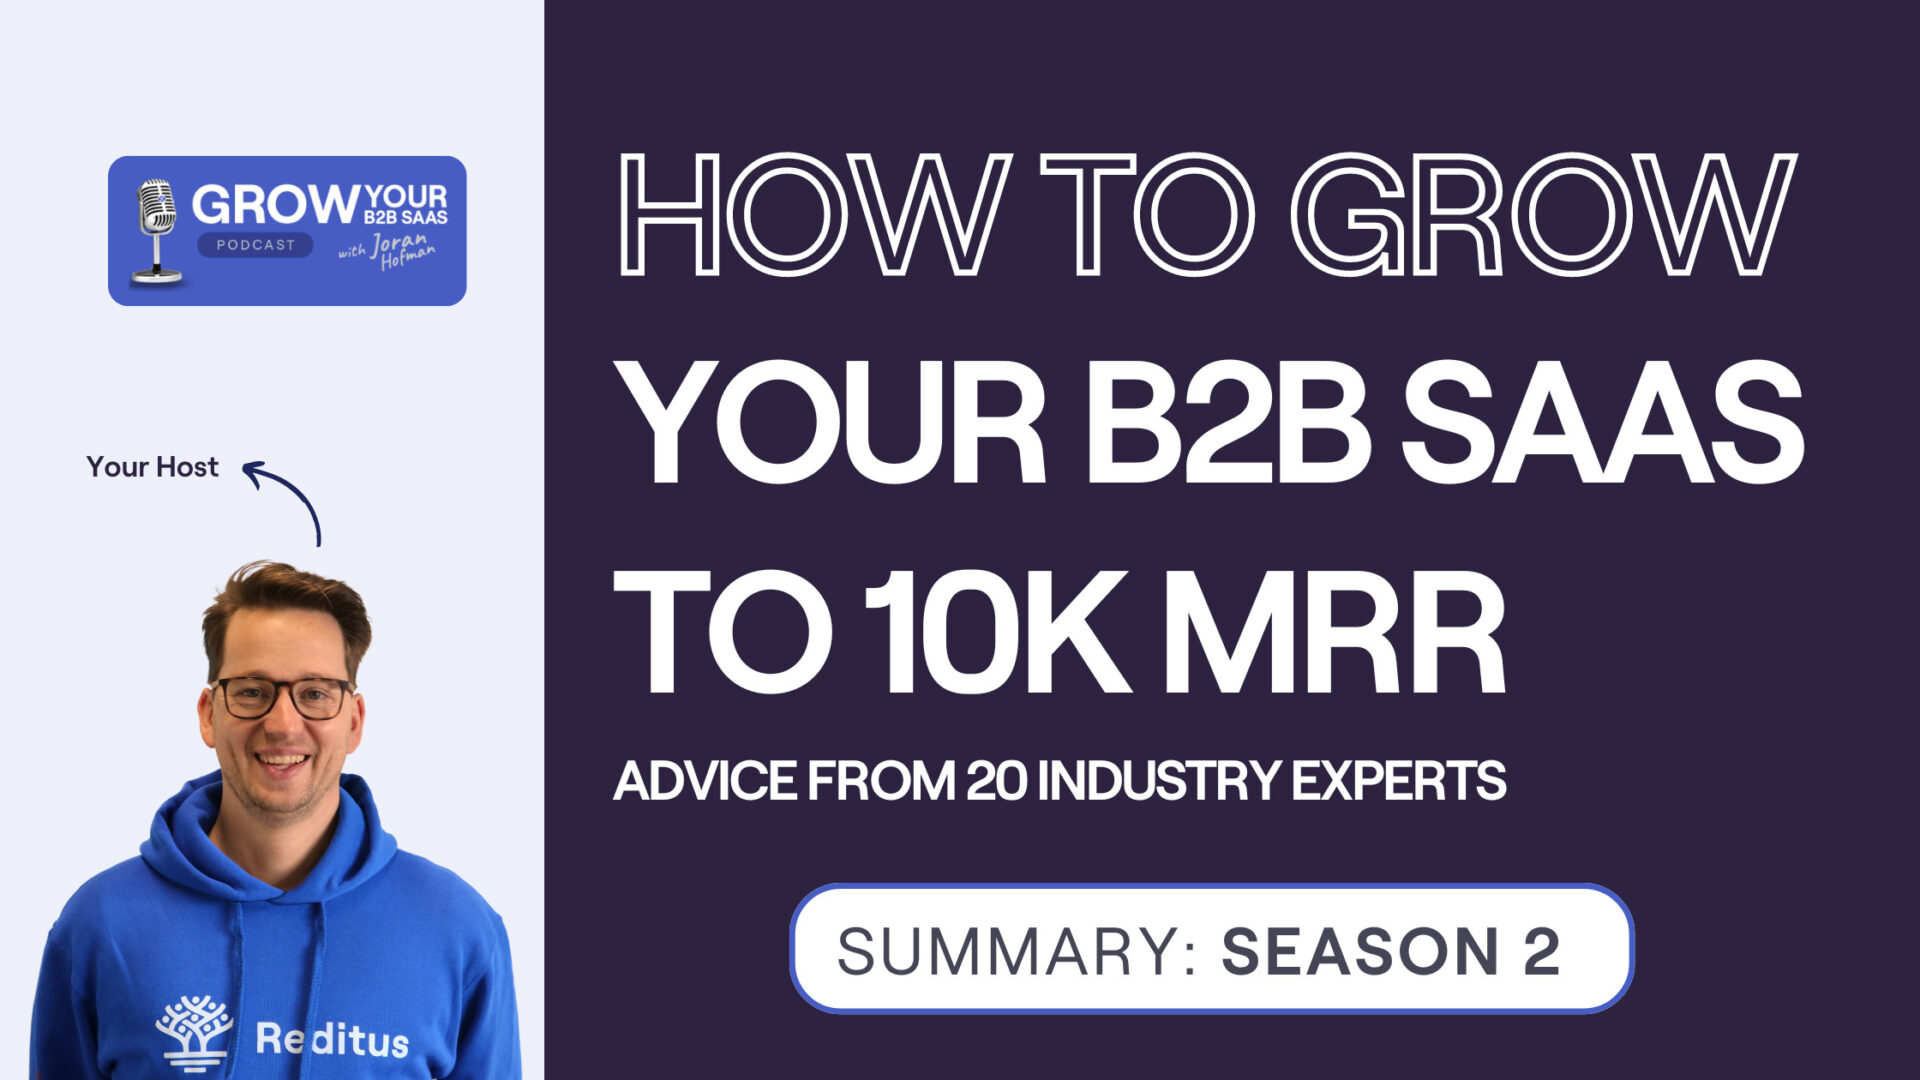 S2E21 – How to grow your B2B SaaS to 10k MRR? Advice from 20 experts.